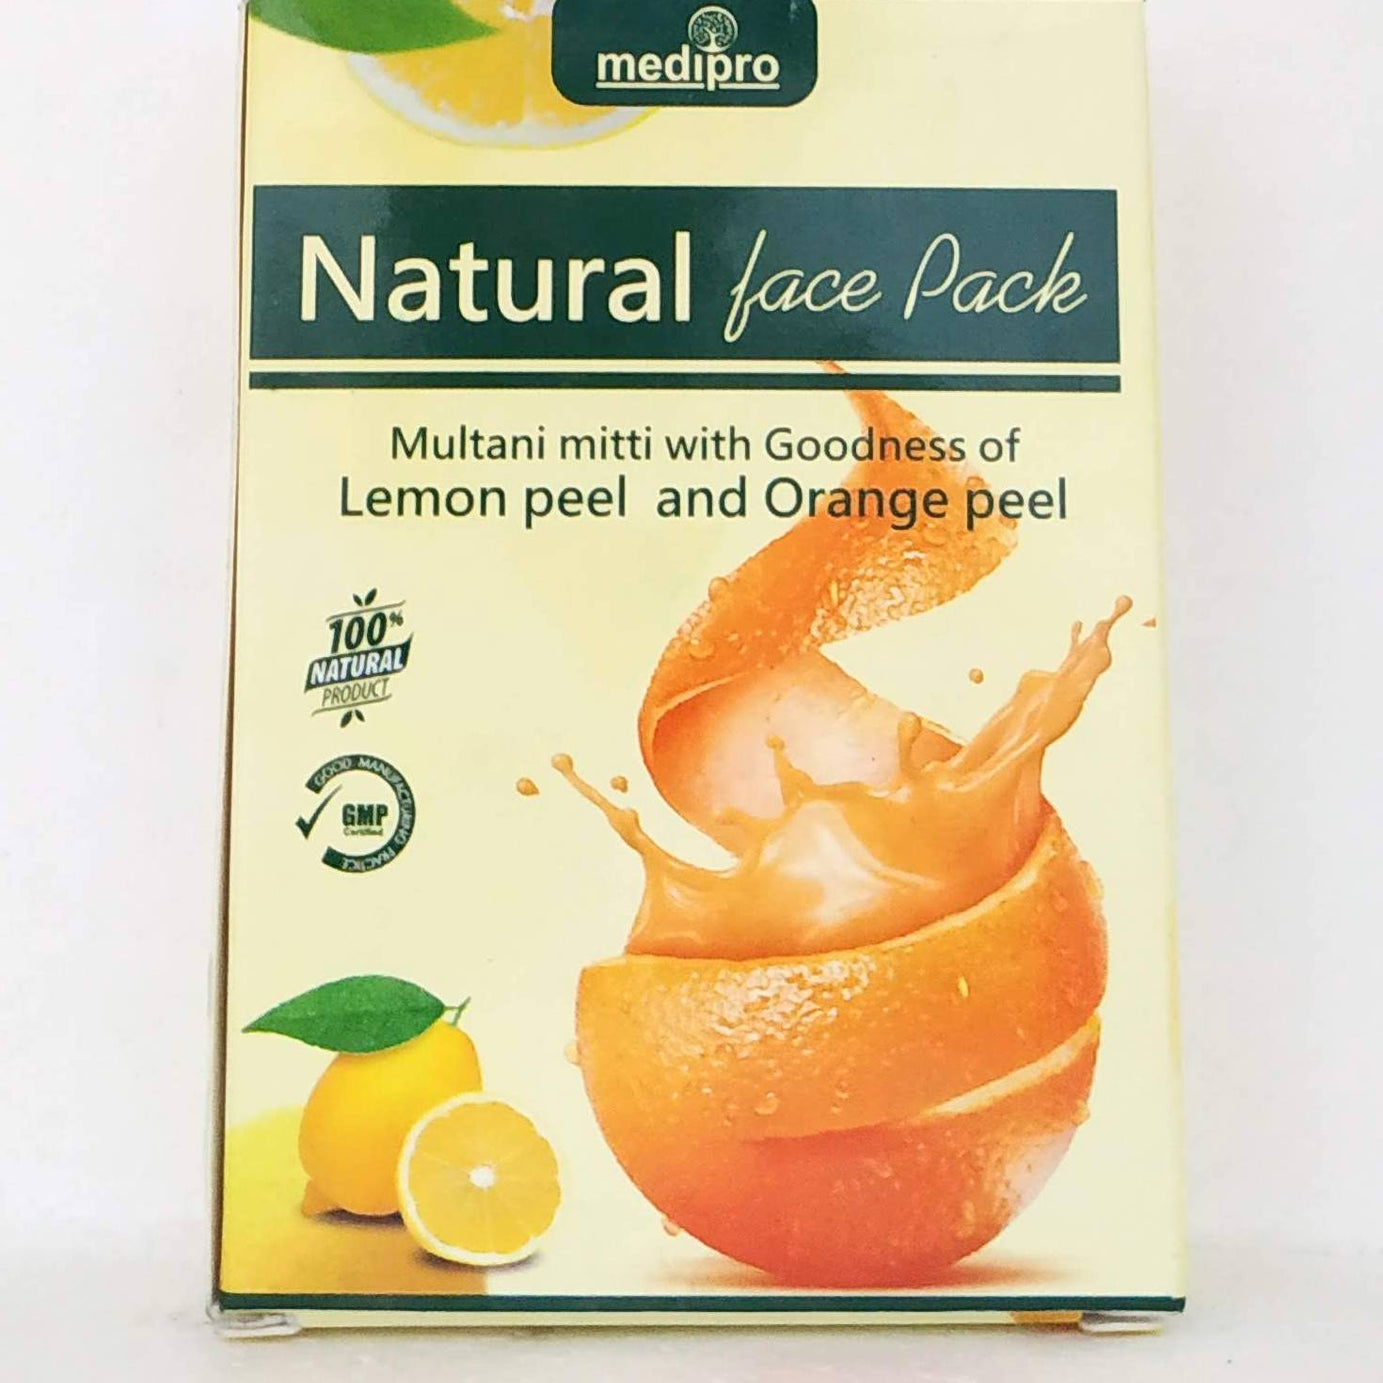 Shop Medipro Natural face pack 100gm at price 50.00 from Medipro Online - Ayush Care